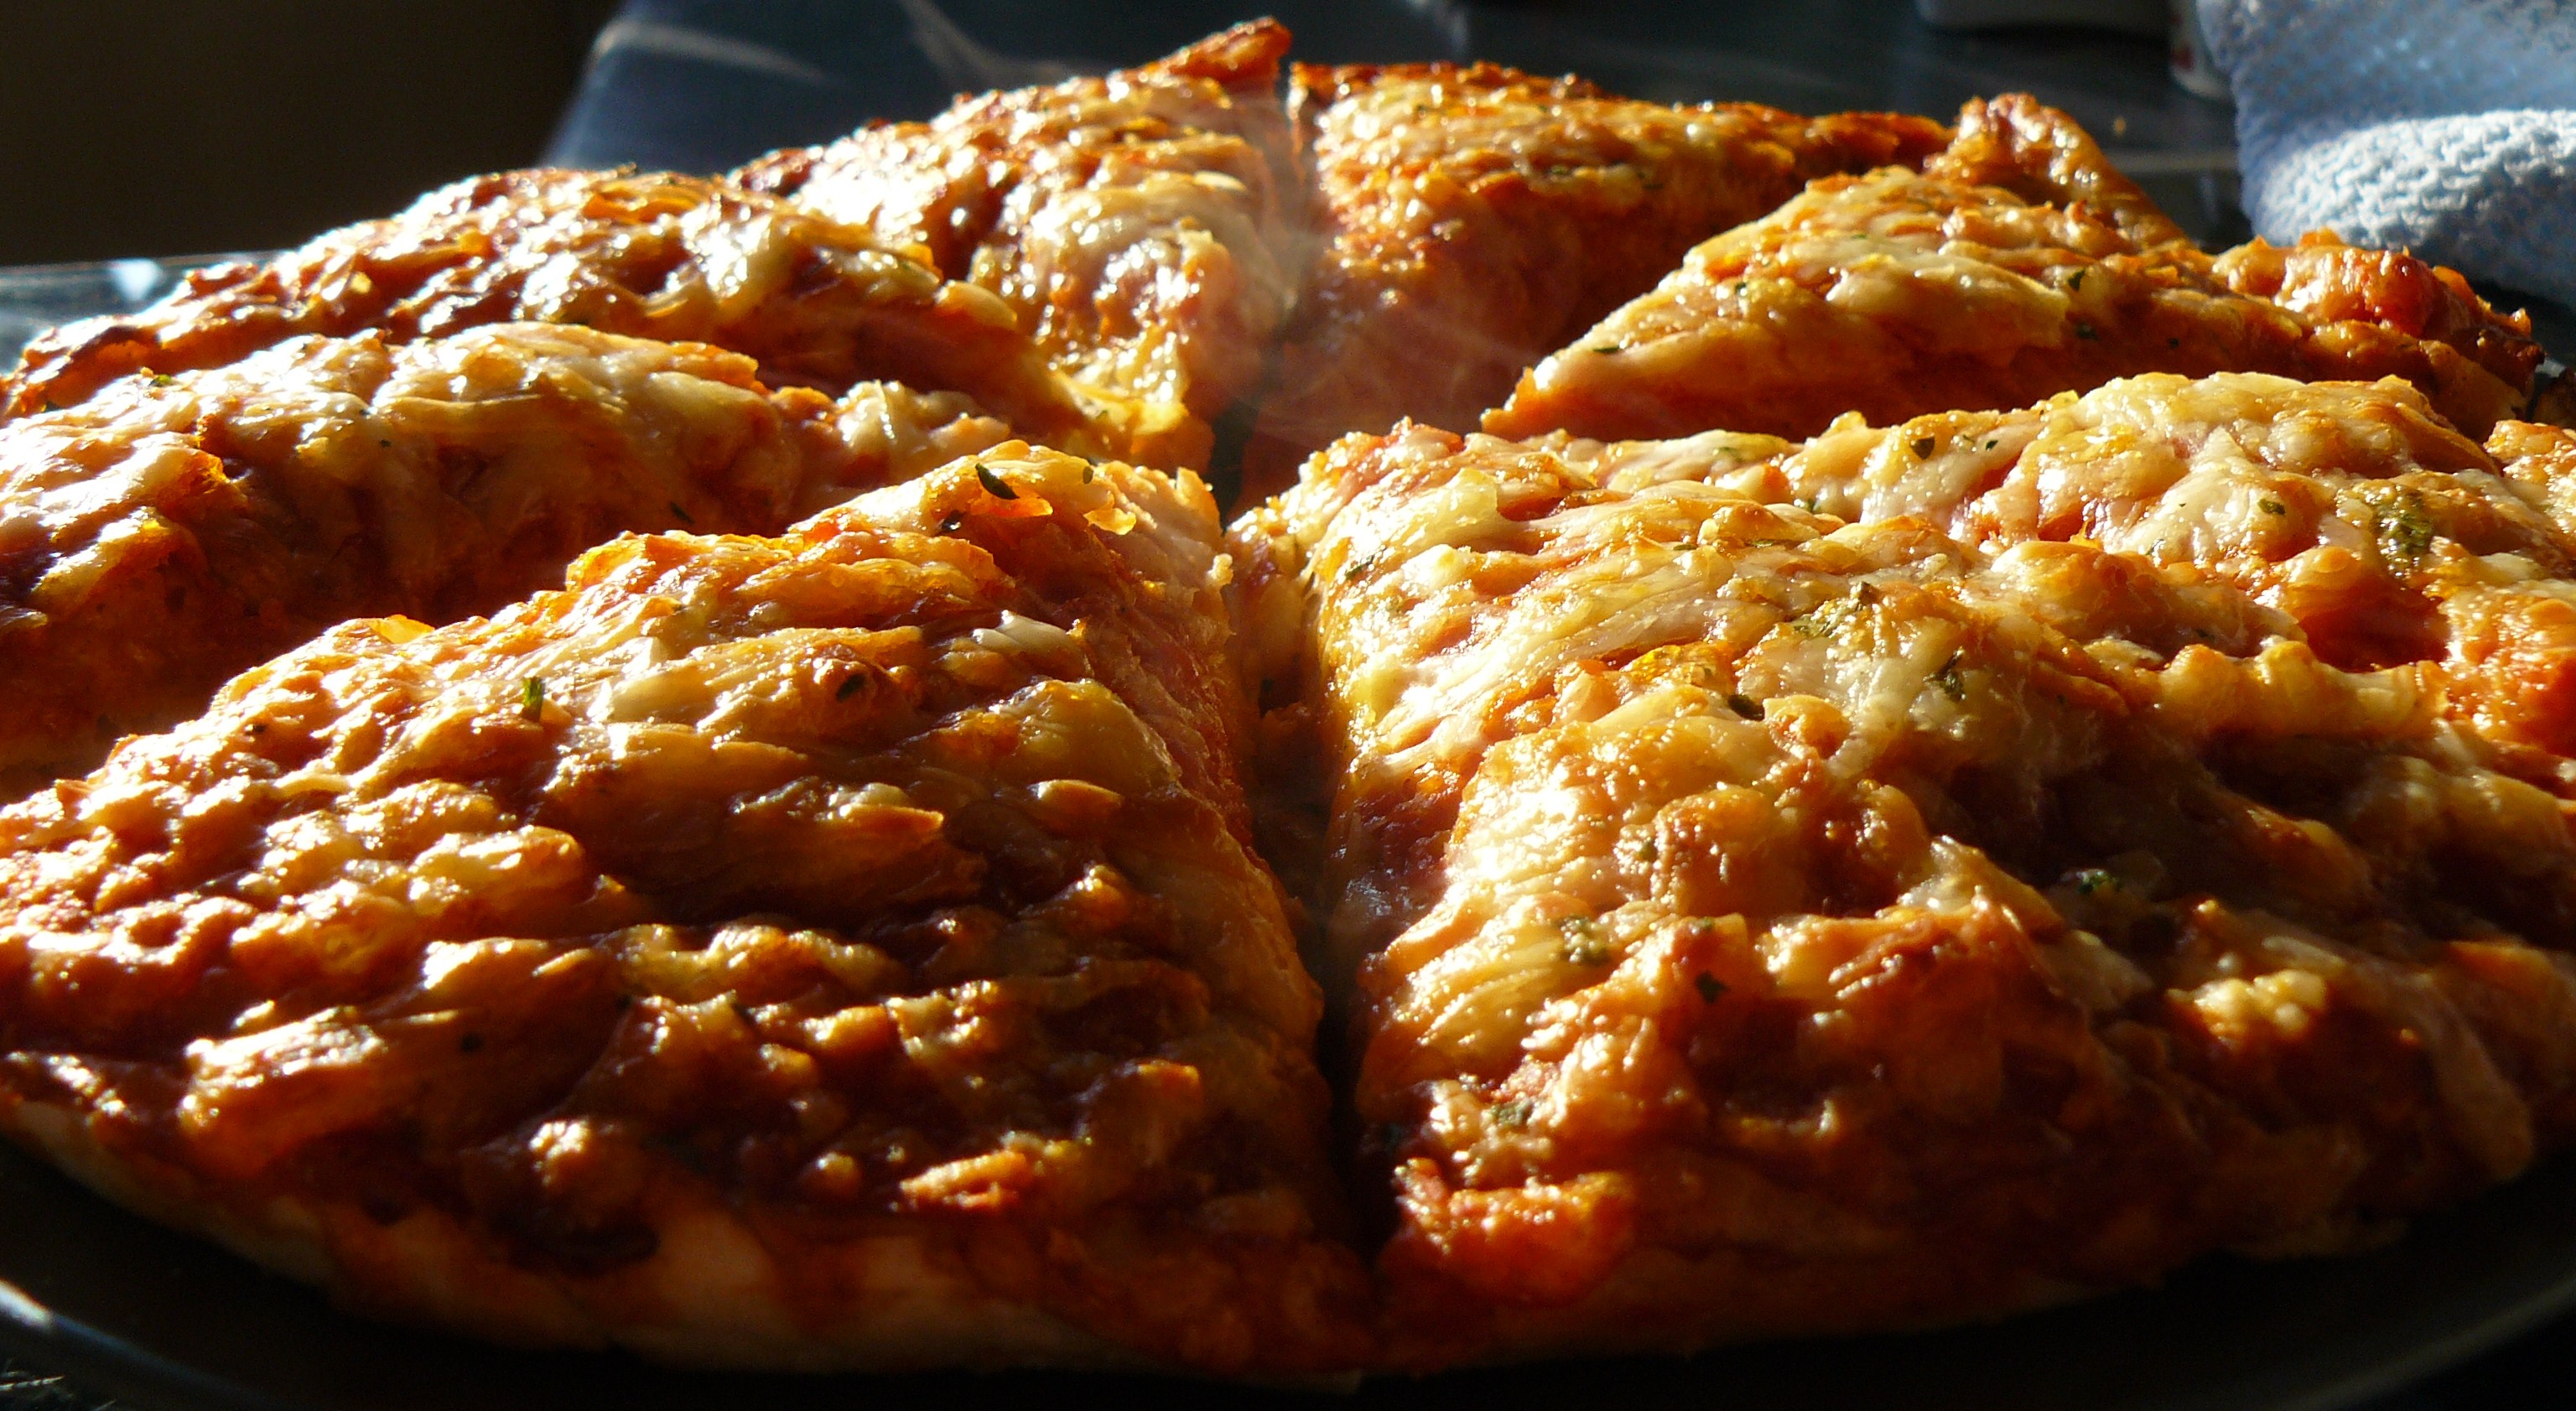 File:CHEESE AND TOMATO PIZZA.JPG - Wikimedia Commons